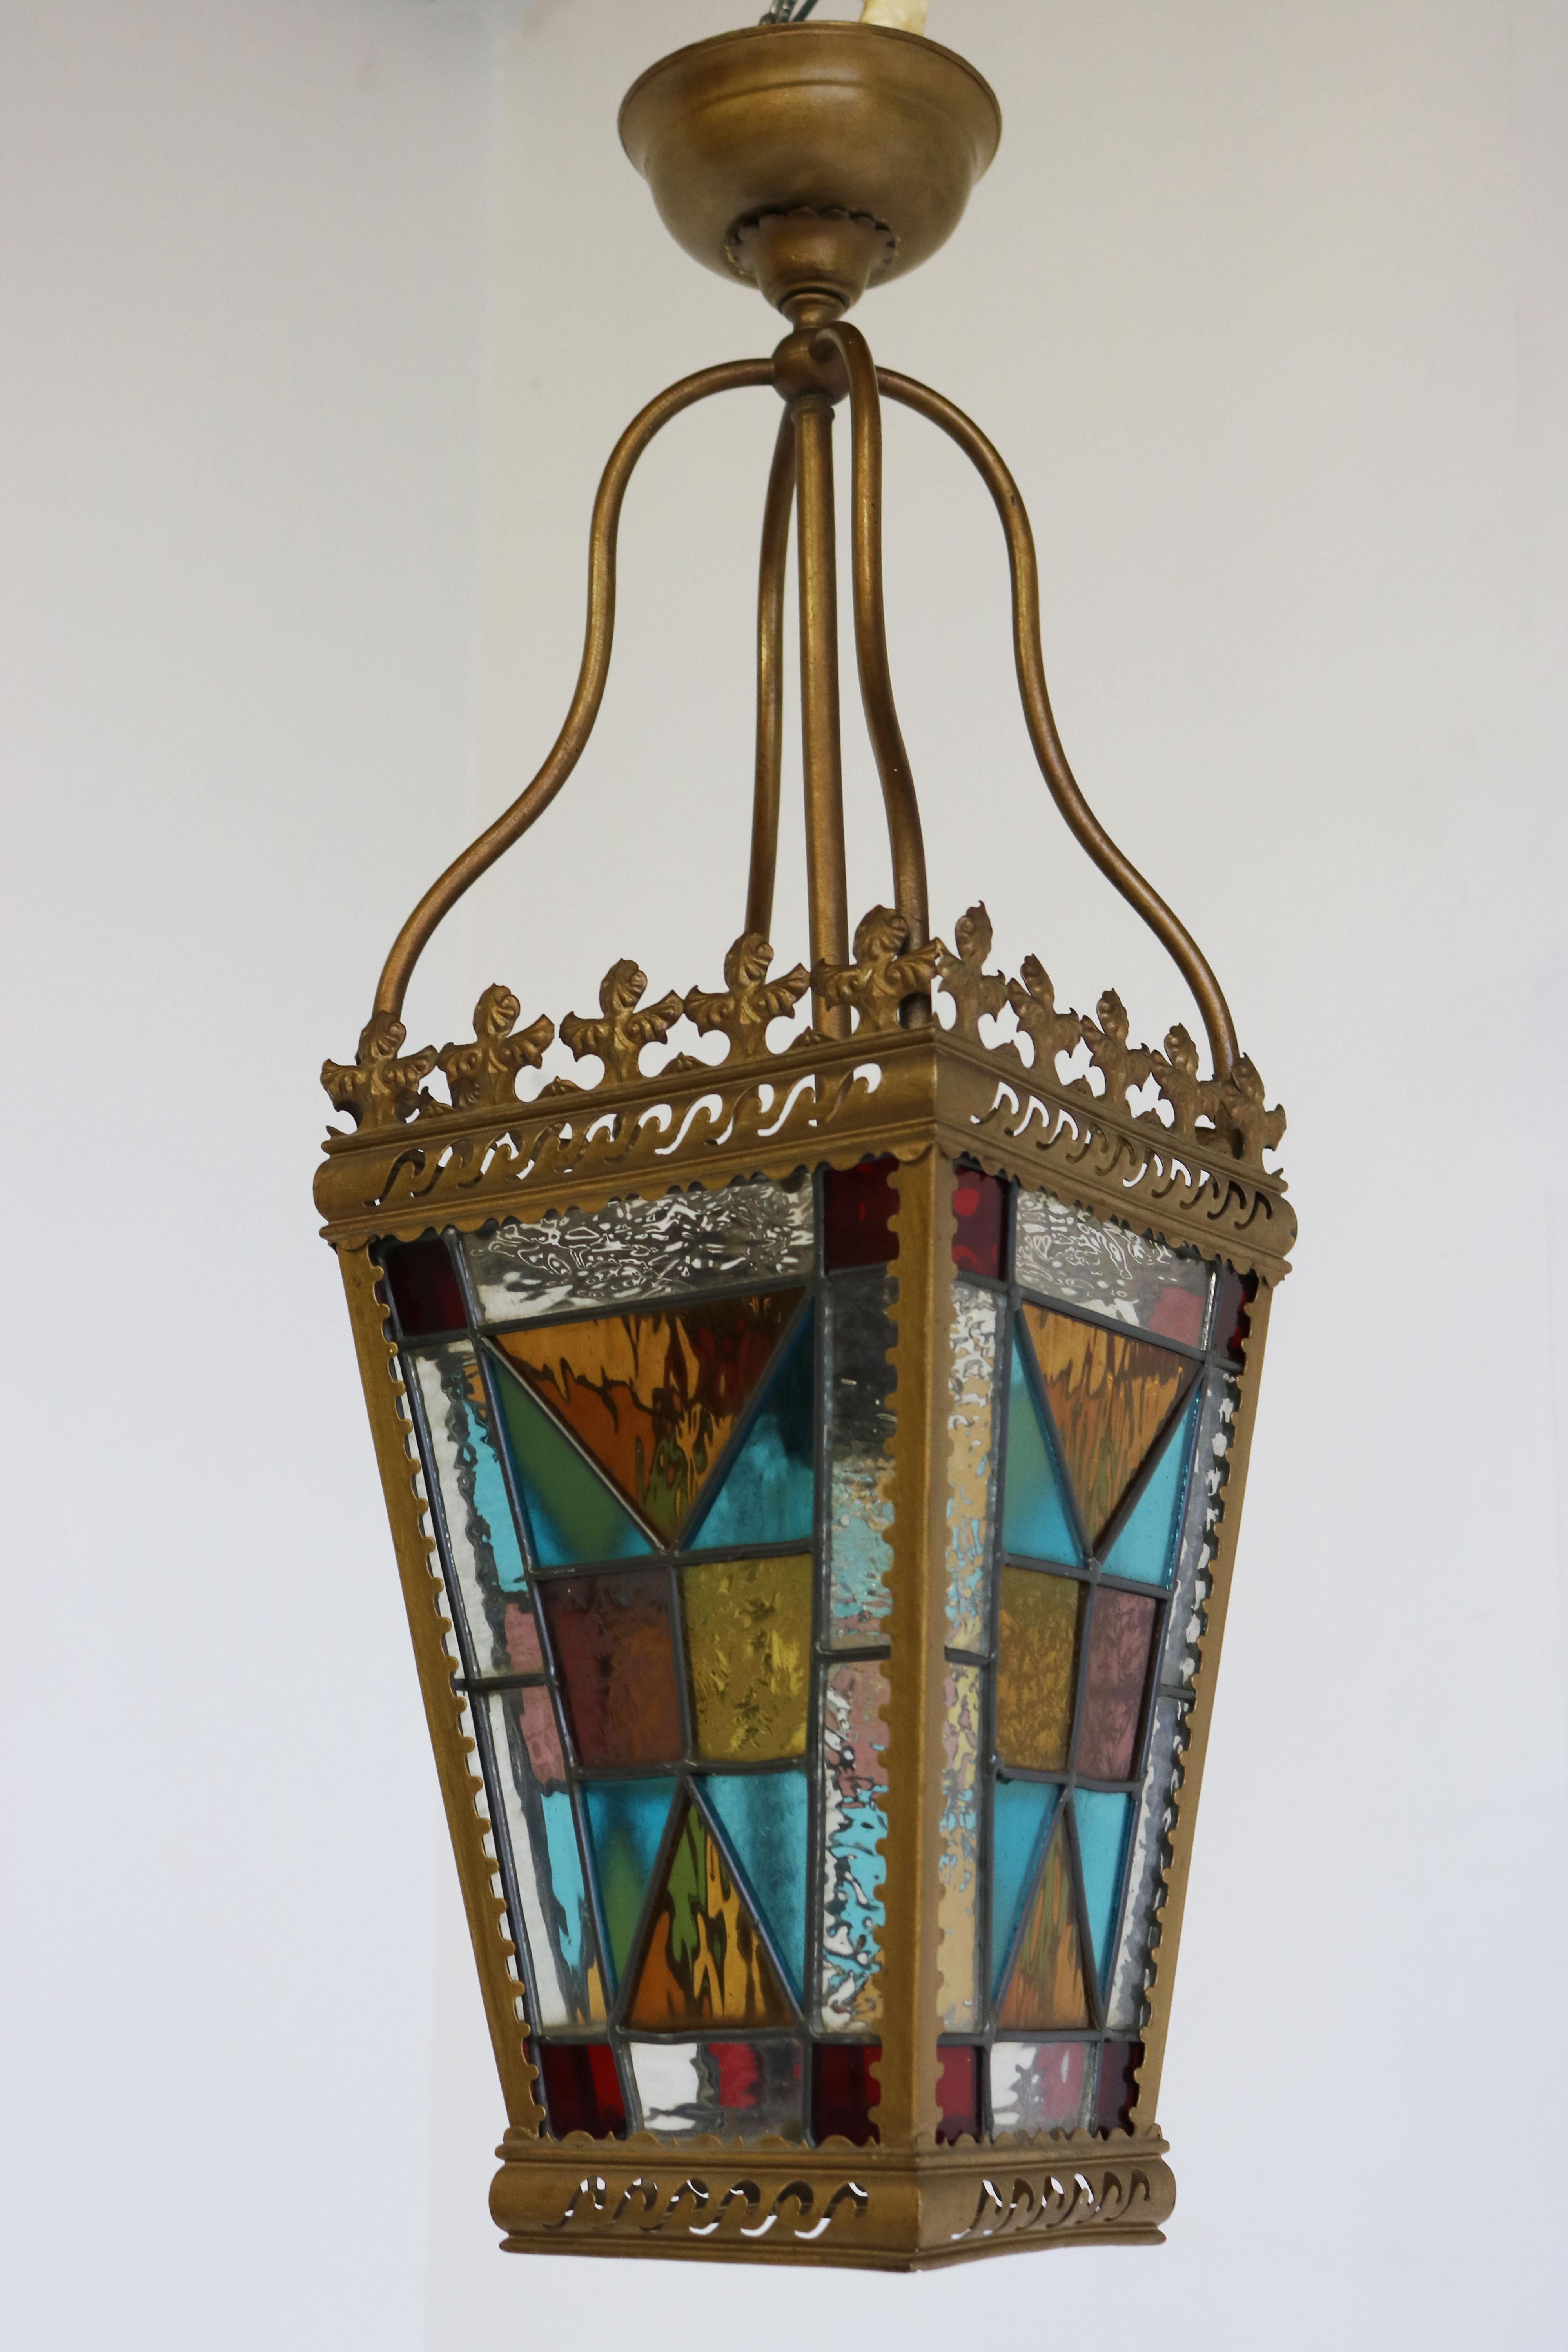 Early 20th Century Early 1900 English Victorian Lantern Light Hallway Stained Glass Brass Pendant